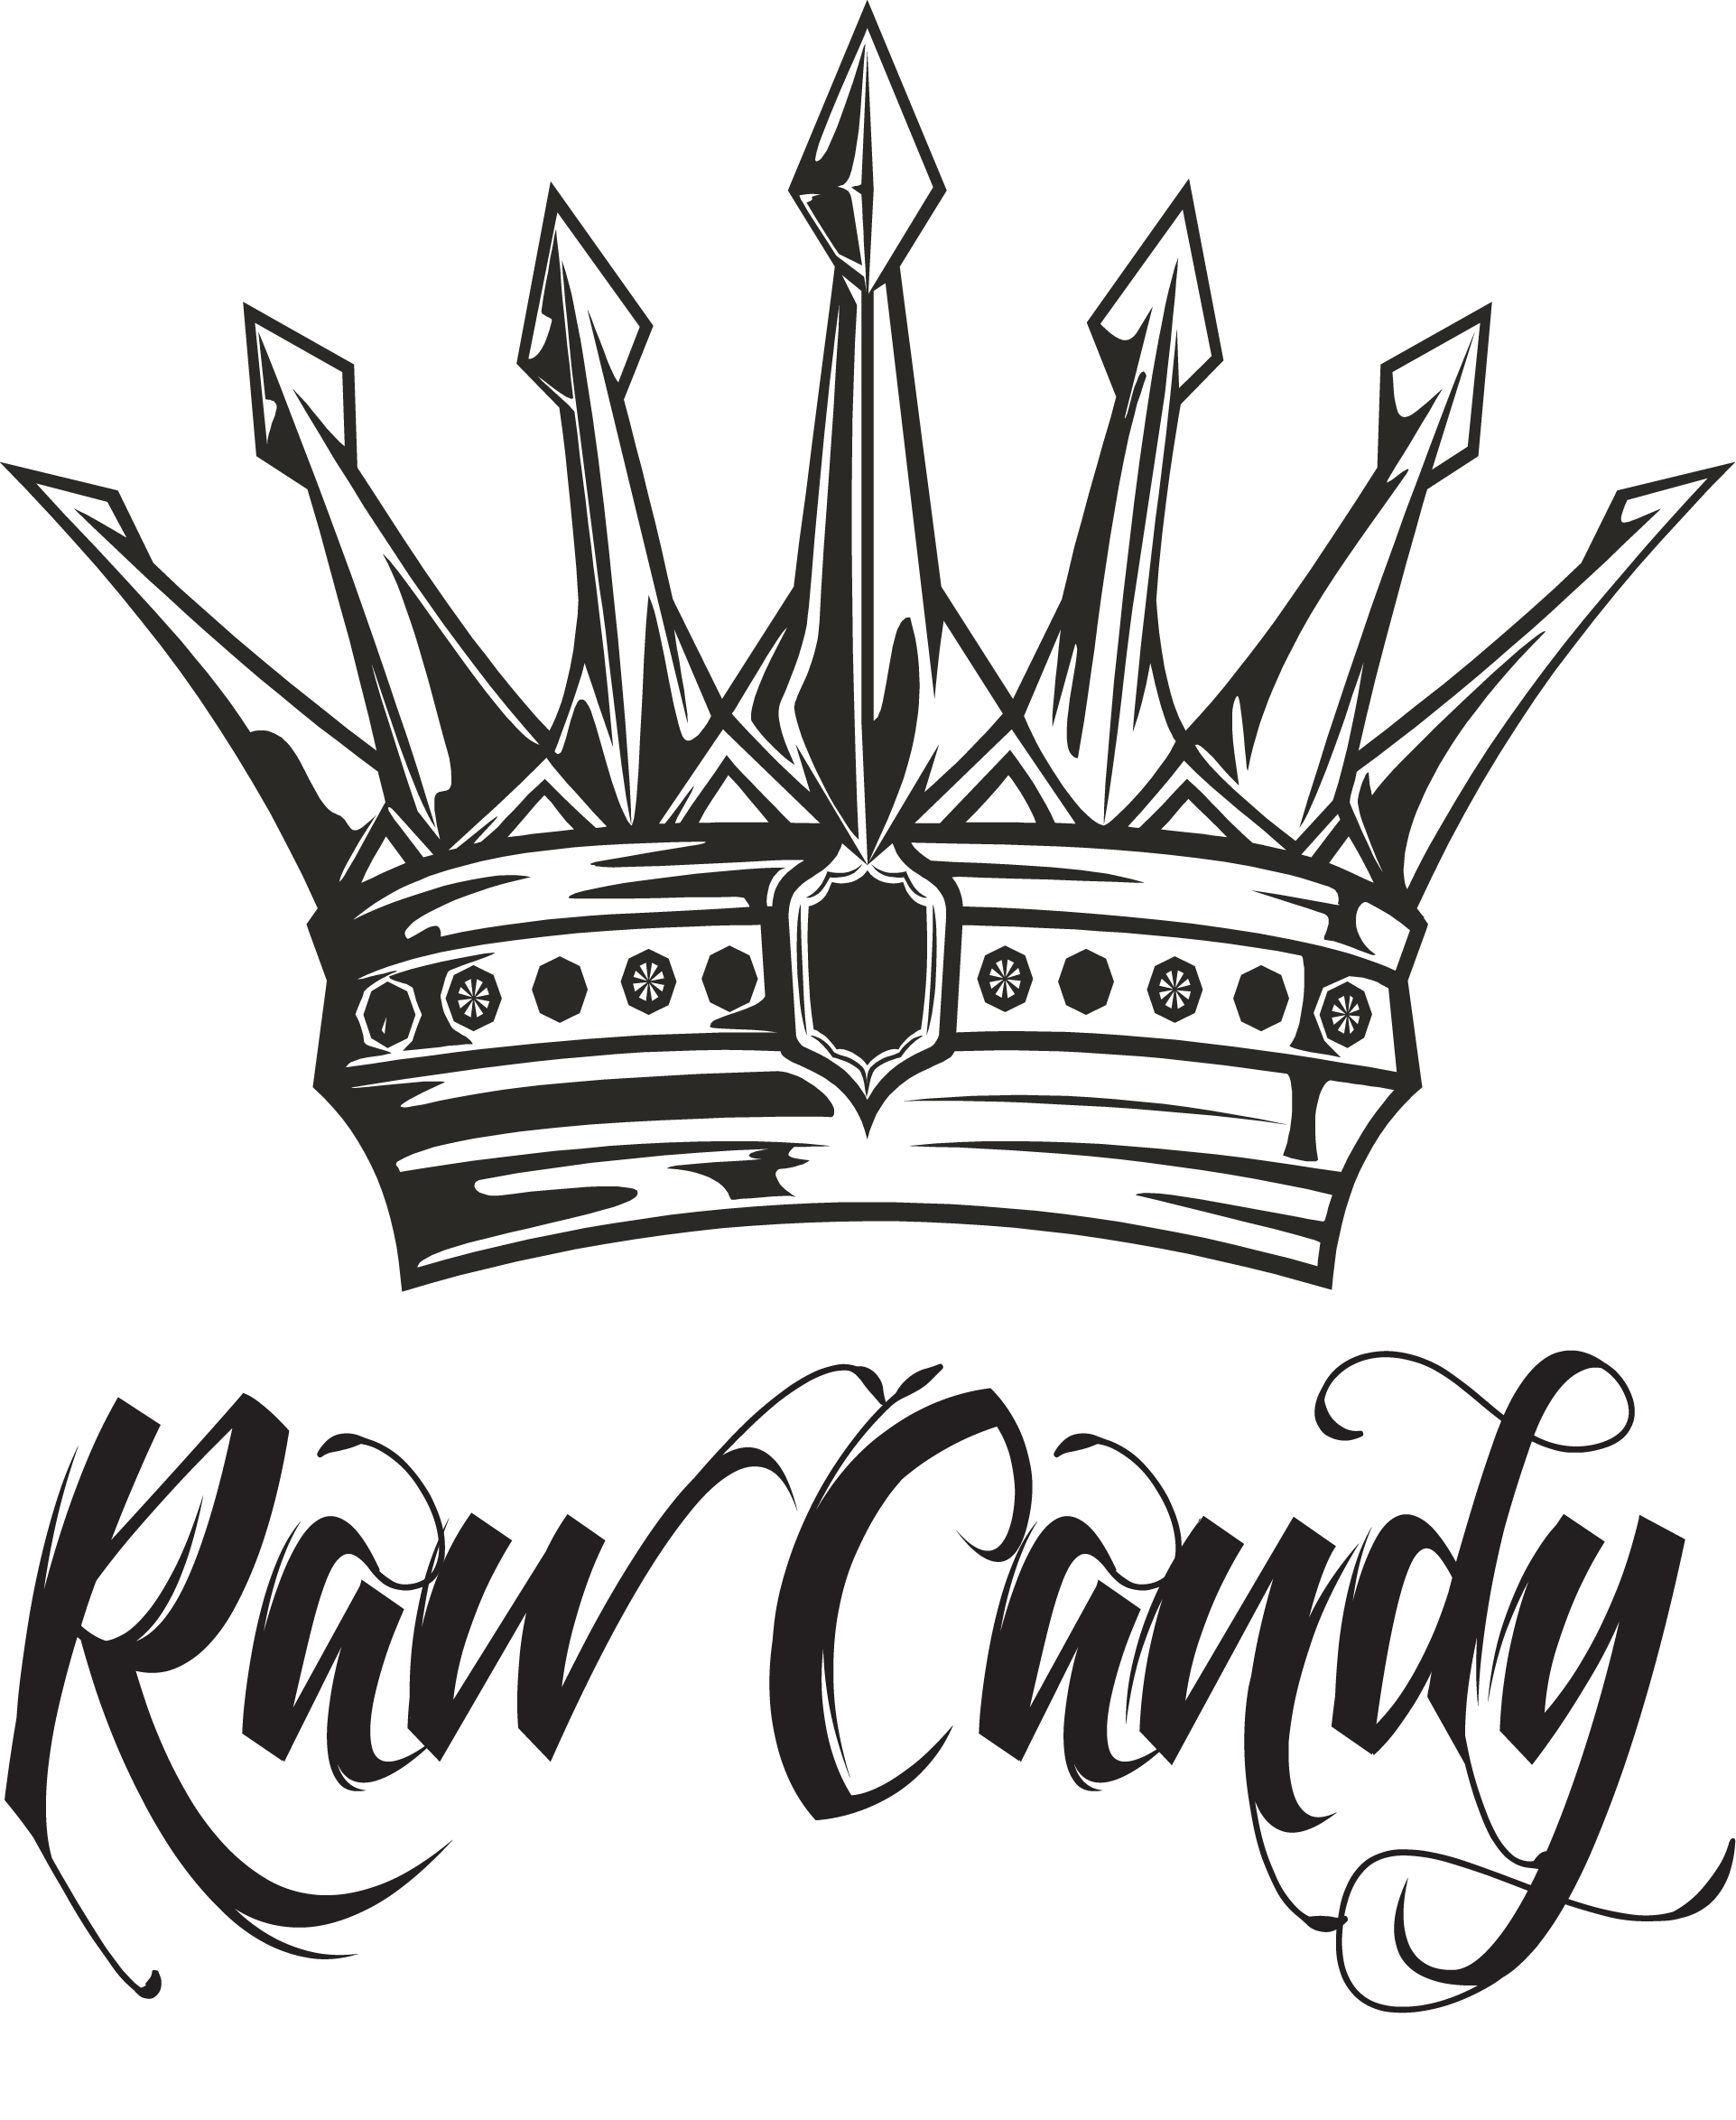 RAW CANDY CLOTHING ©